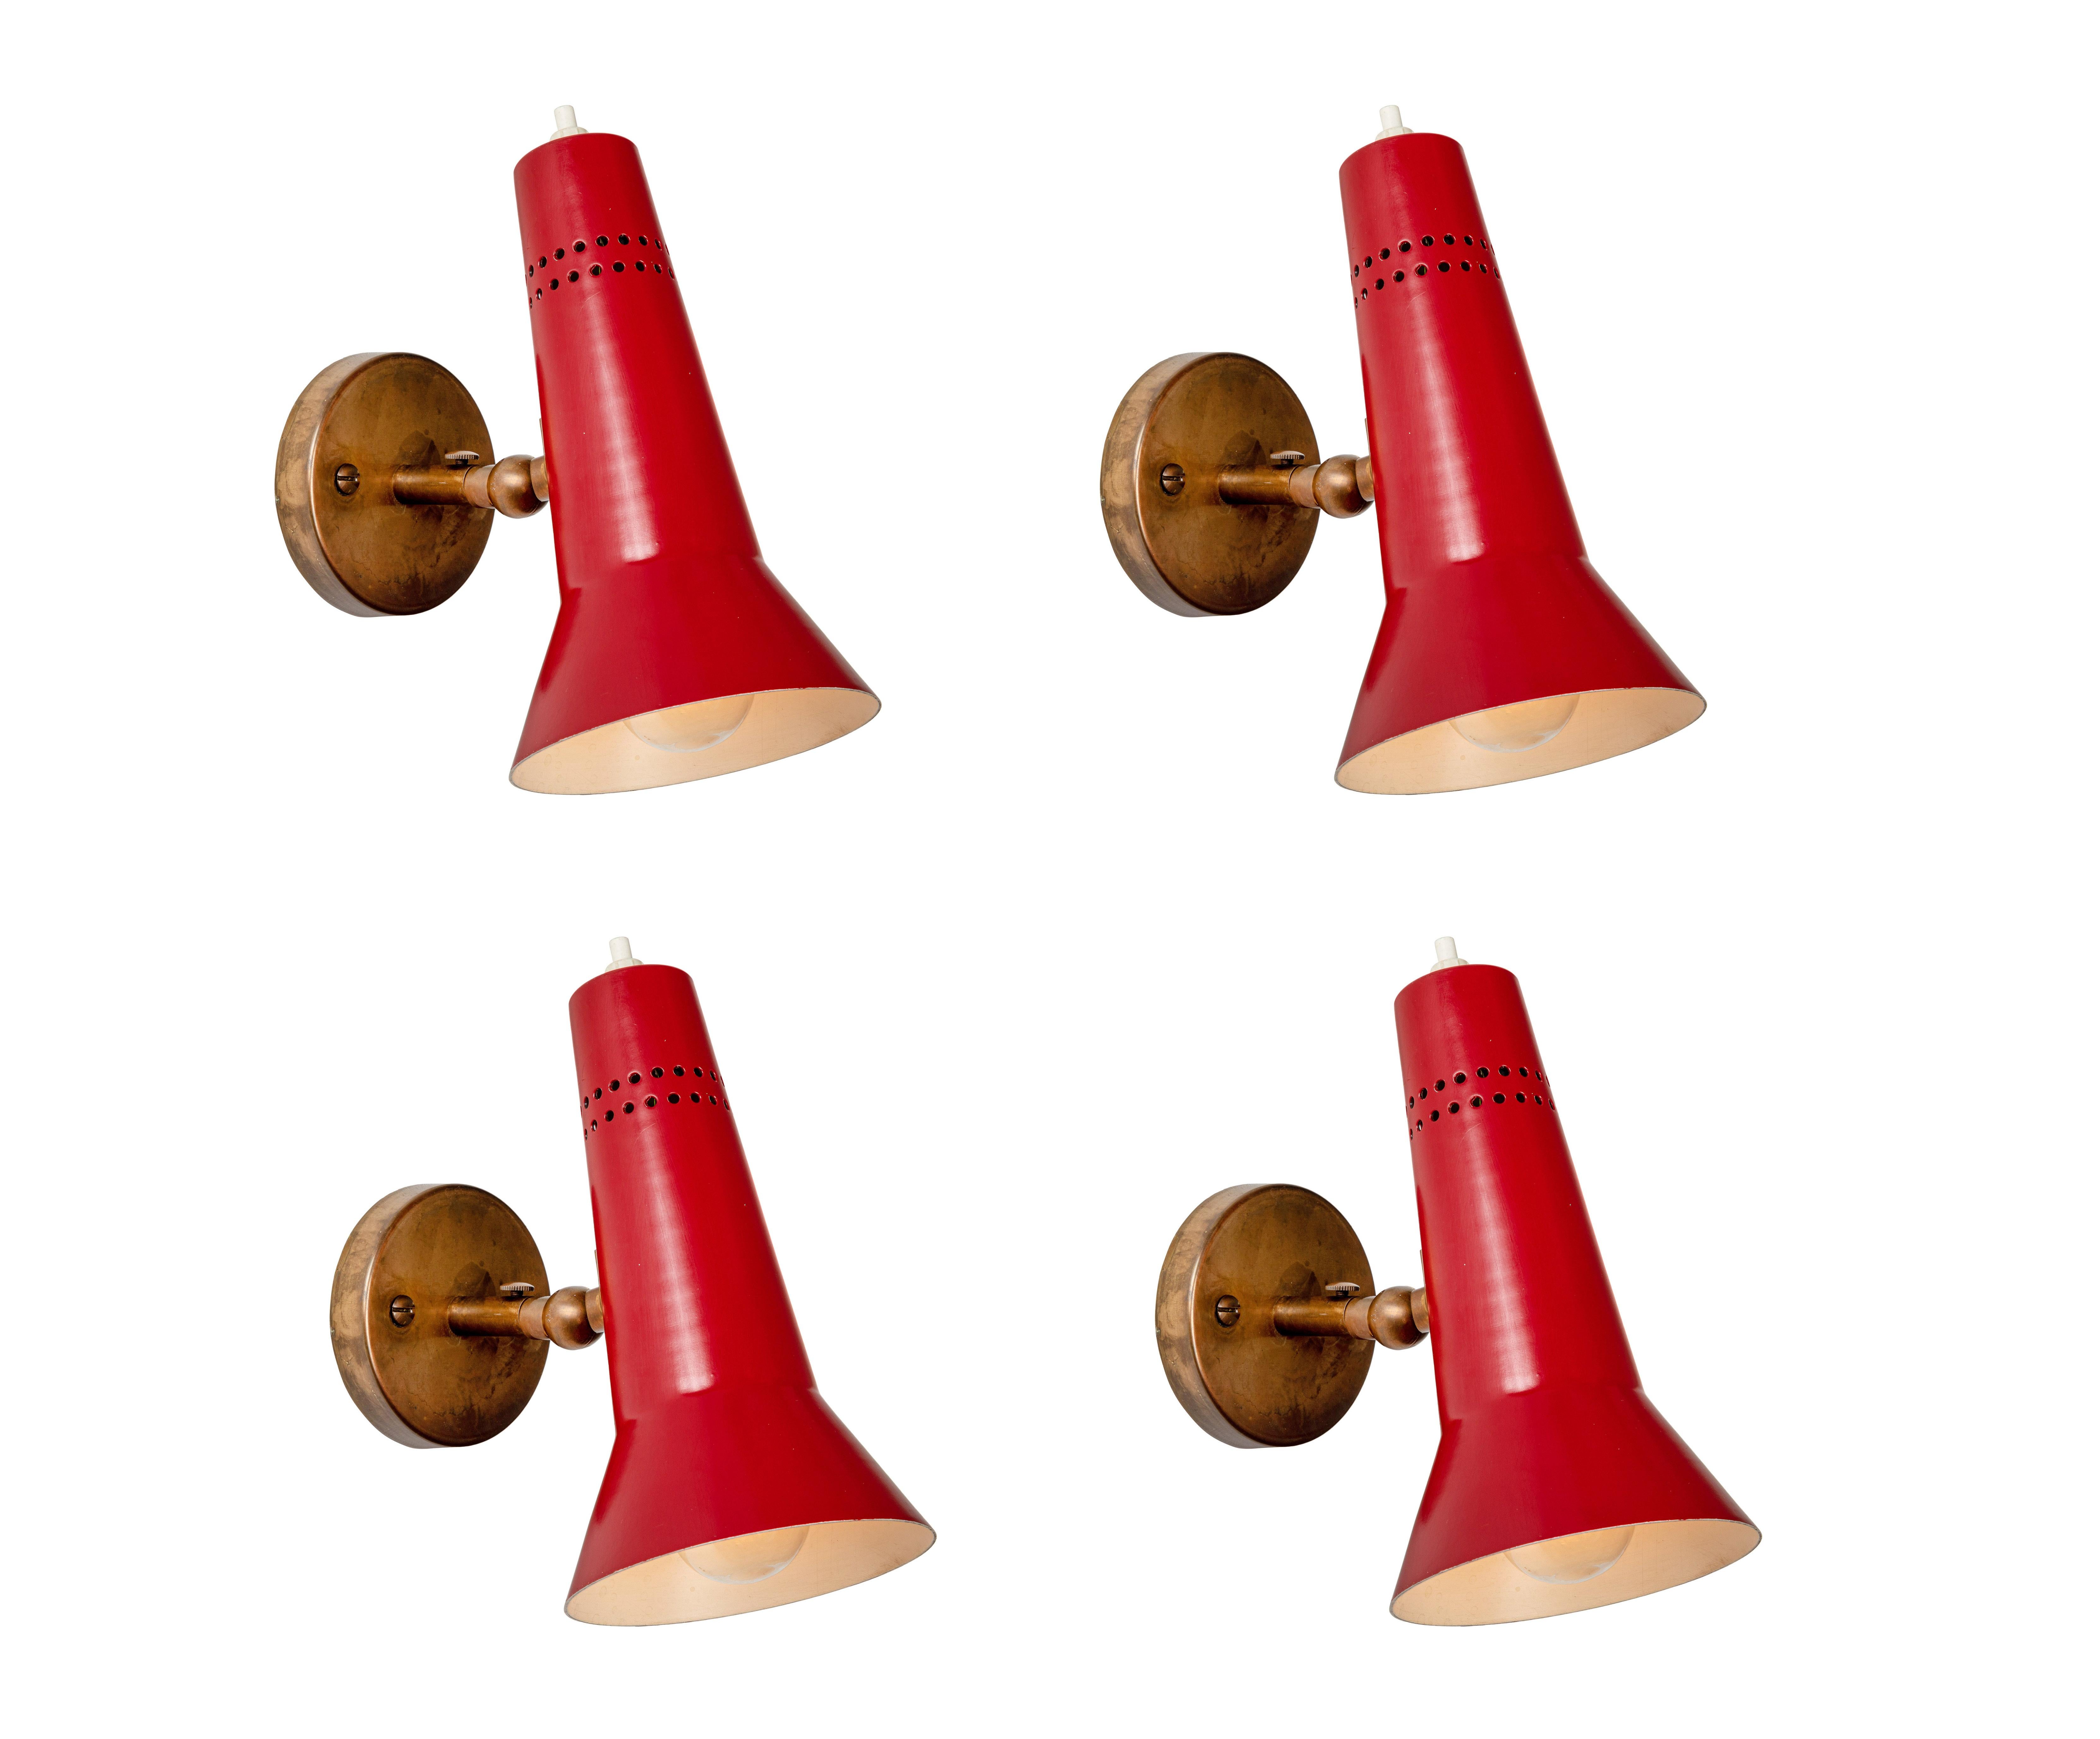 Mid-Century Modern Pair of Gino Sarfatti Model #21 Red Perforated Sconces for Arteluce, circa 1955 For Sale